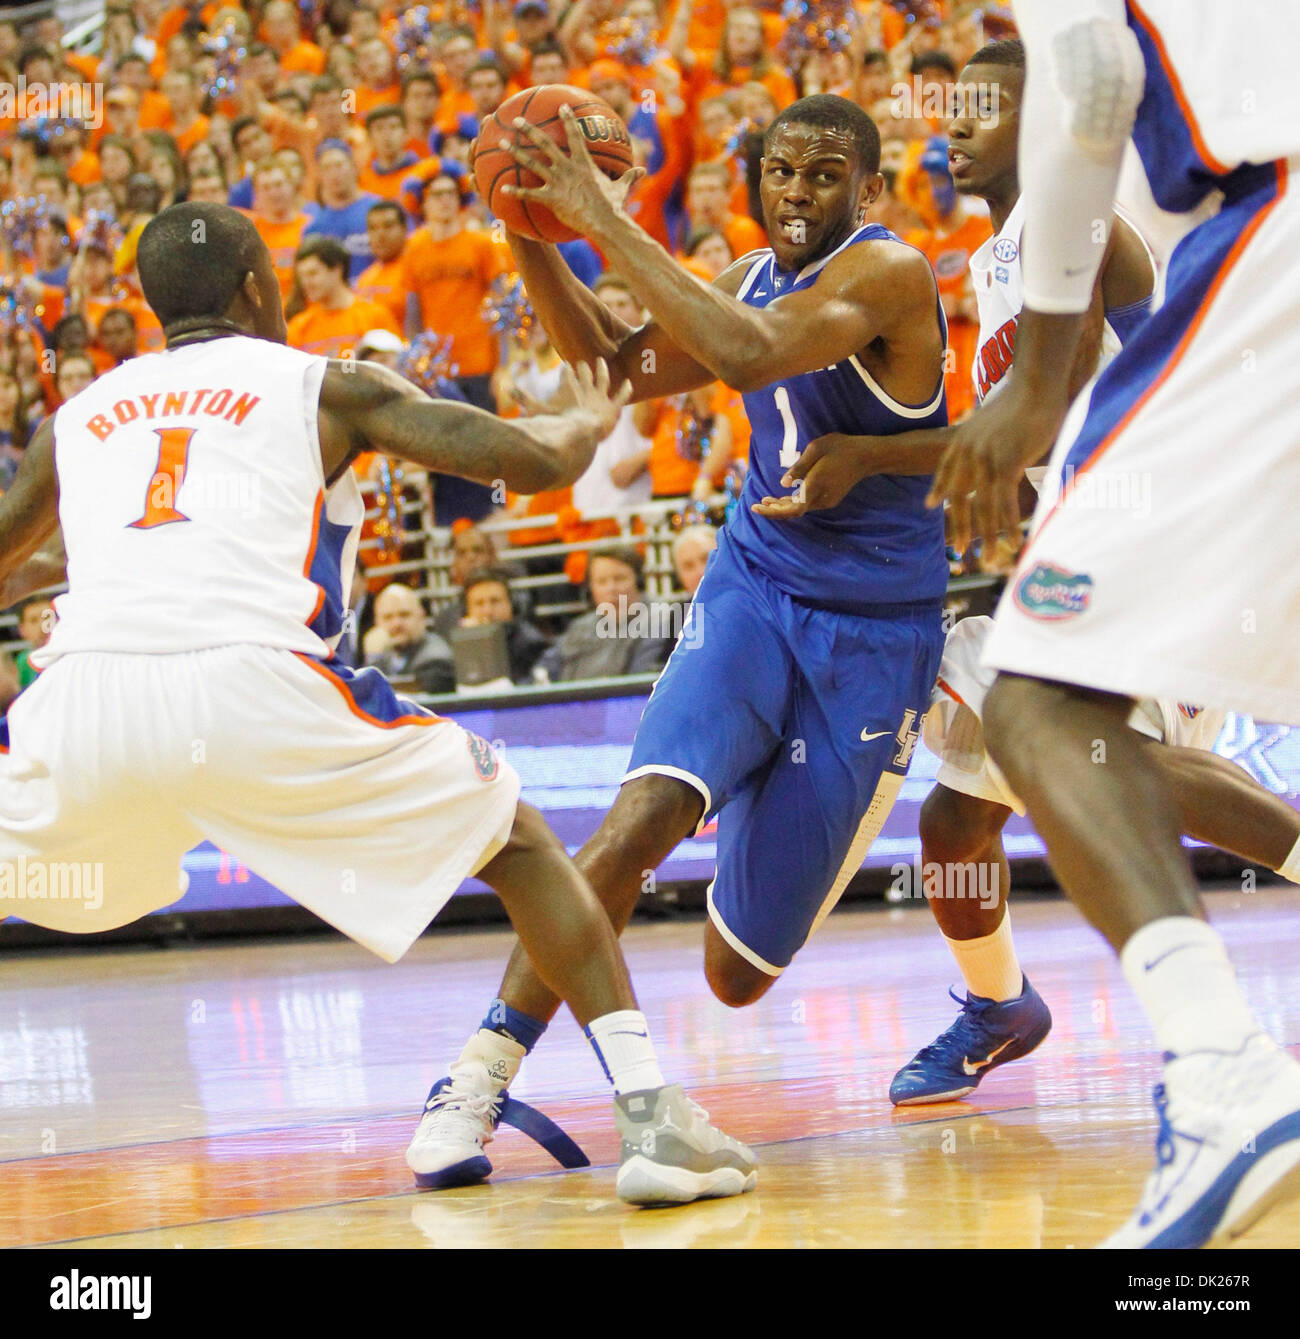 Feb. 5, 2011 - Gainesville, Ky., US - Kentucky's Darius Miller drove toward the basket guarded by Kenny Boynton, left and Patric Young, right during the first half of the Kentucky at Florida men's SEC basketball game at O'Connell Center in Gainesville, Ky., on Saturday Feb. 5, 2011.   Florida lead 34-32- at halftime. Photo by Pablo Alcala | Staff (Credit Image: © Lexington Herald-L Stock Photo